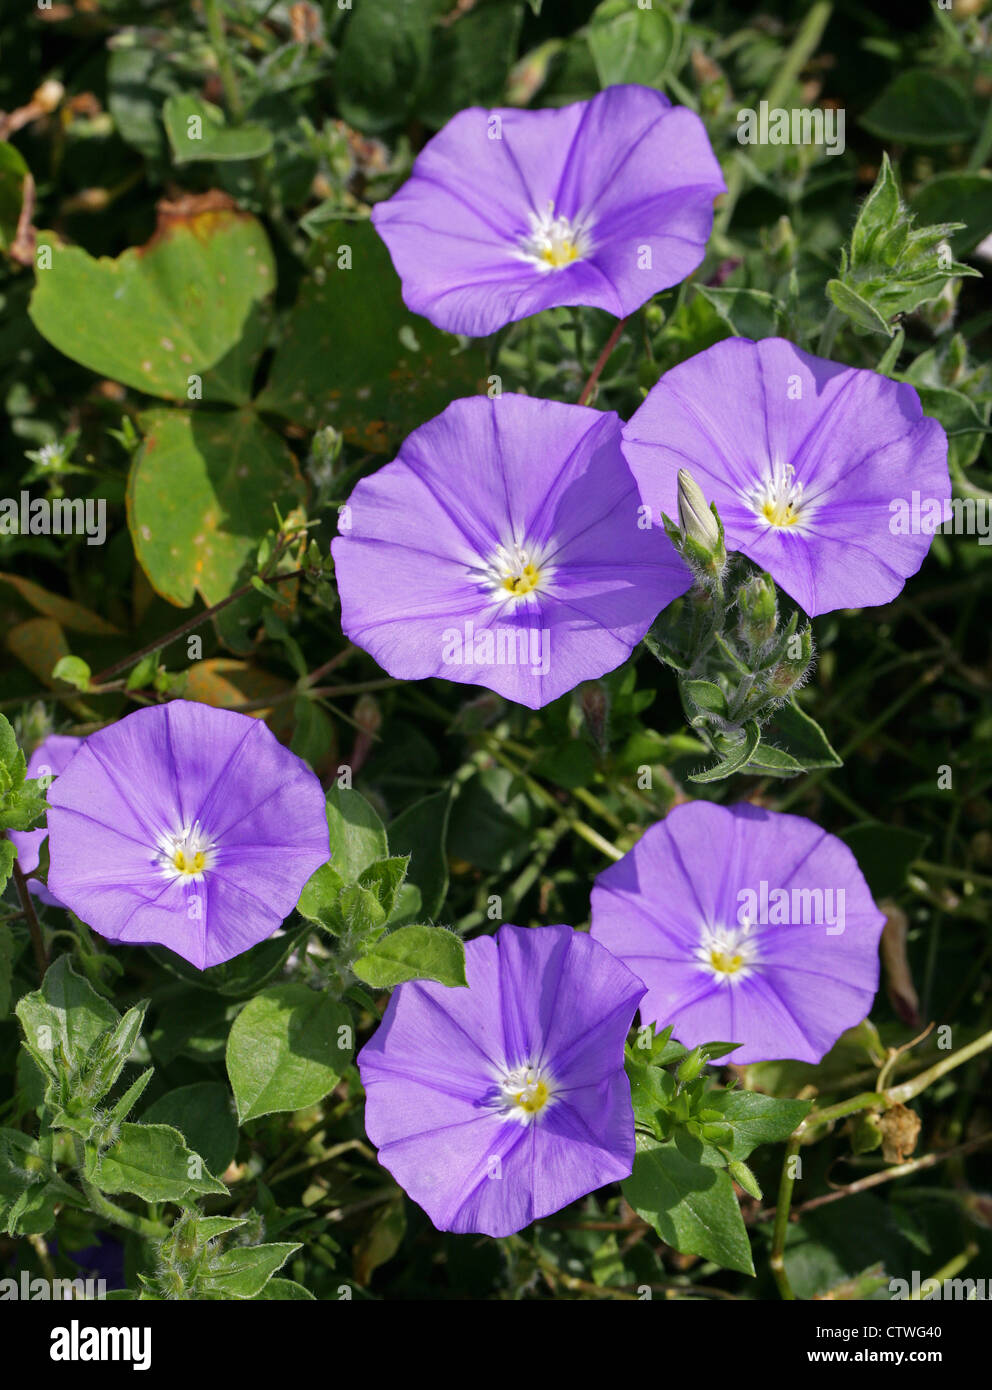 Blue Rock Bindweed, Convolvulus sabatius, Convolvulaceae. Italy, Sicily and North Africa. Also known as C. mauritanicus. Stock Photo